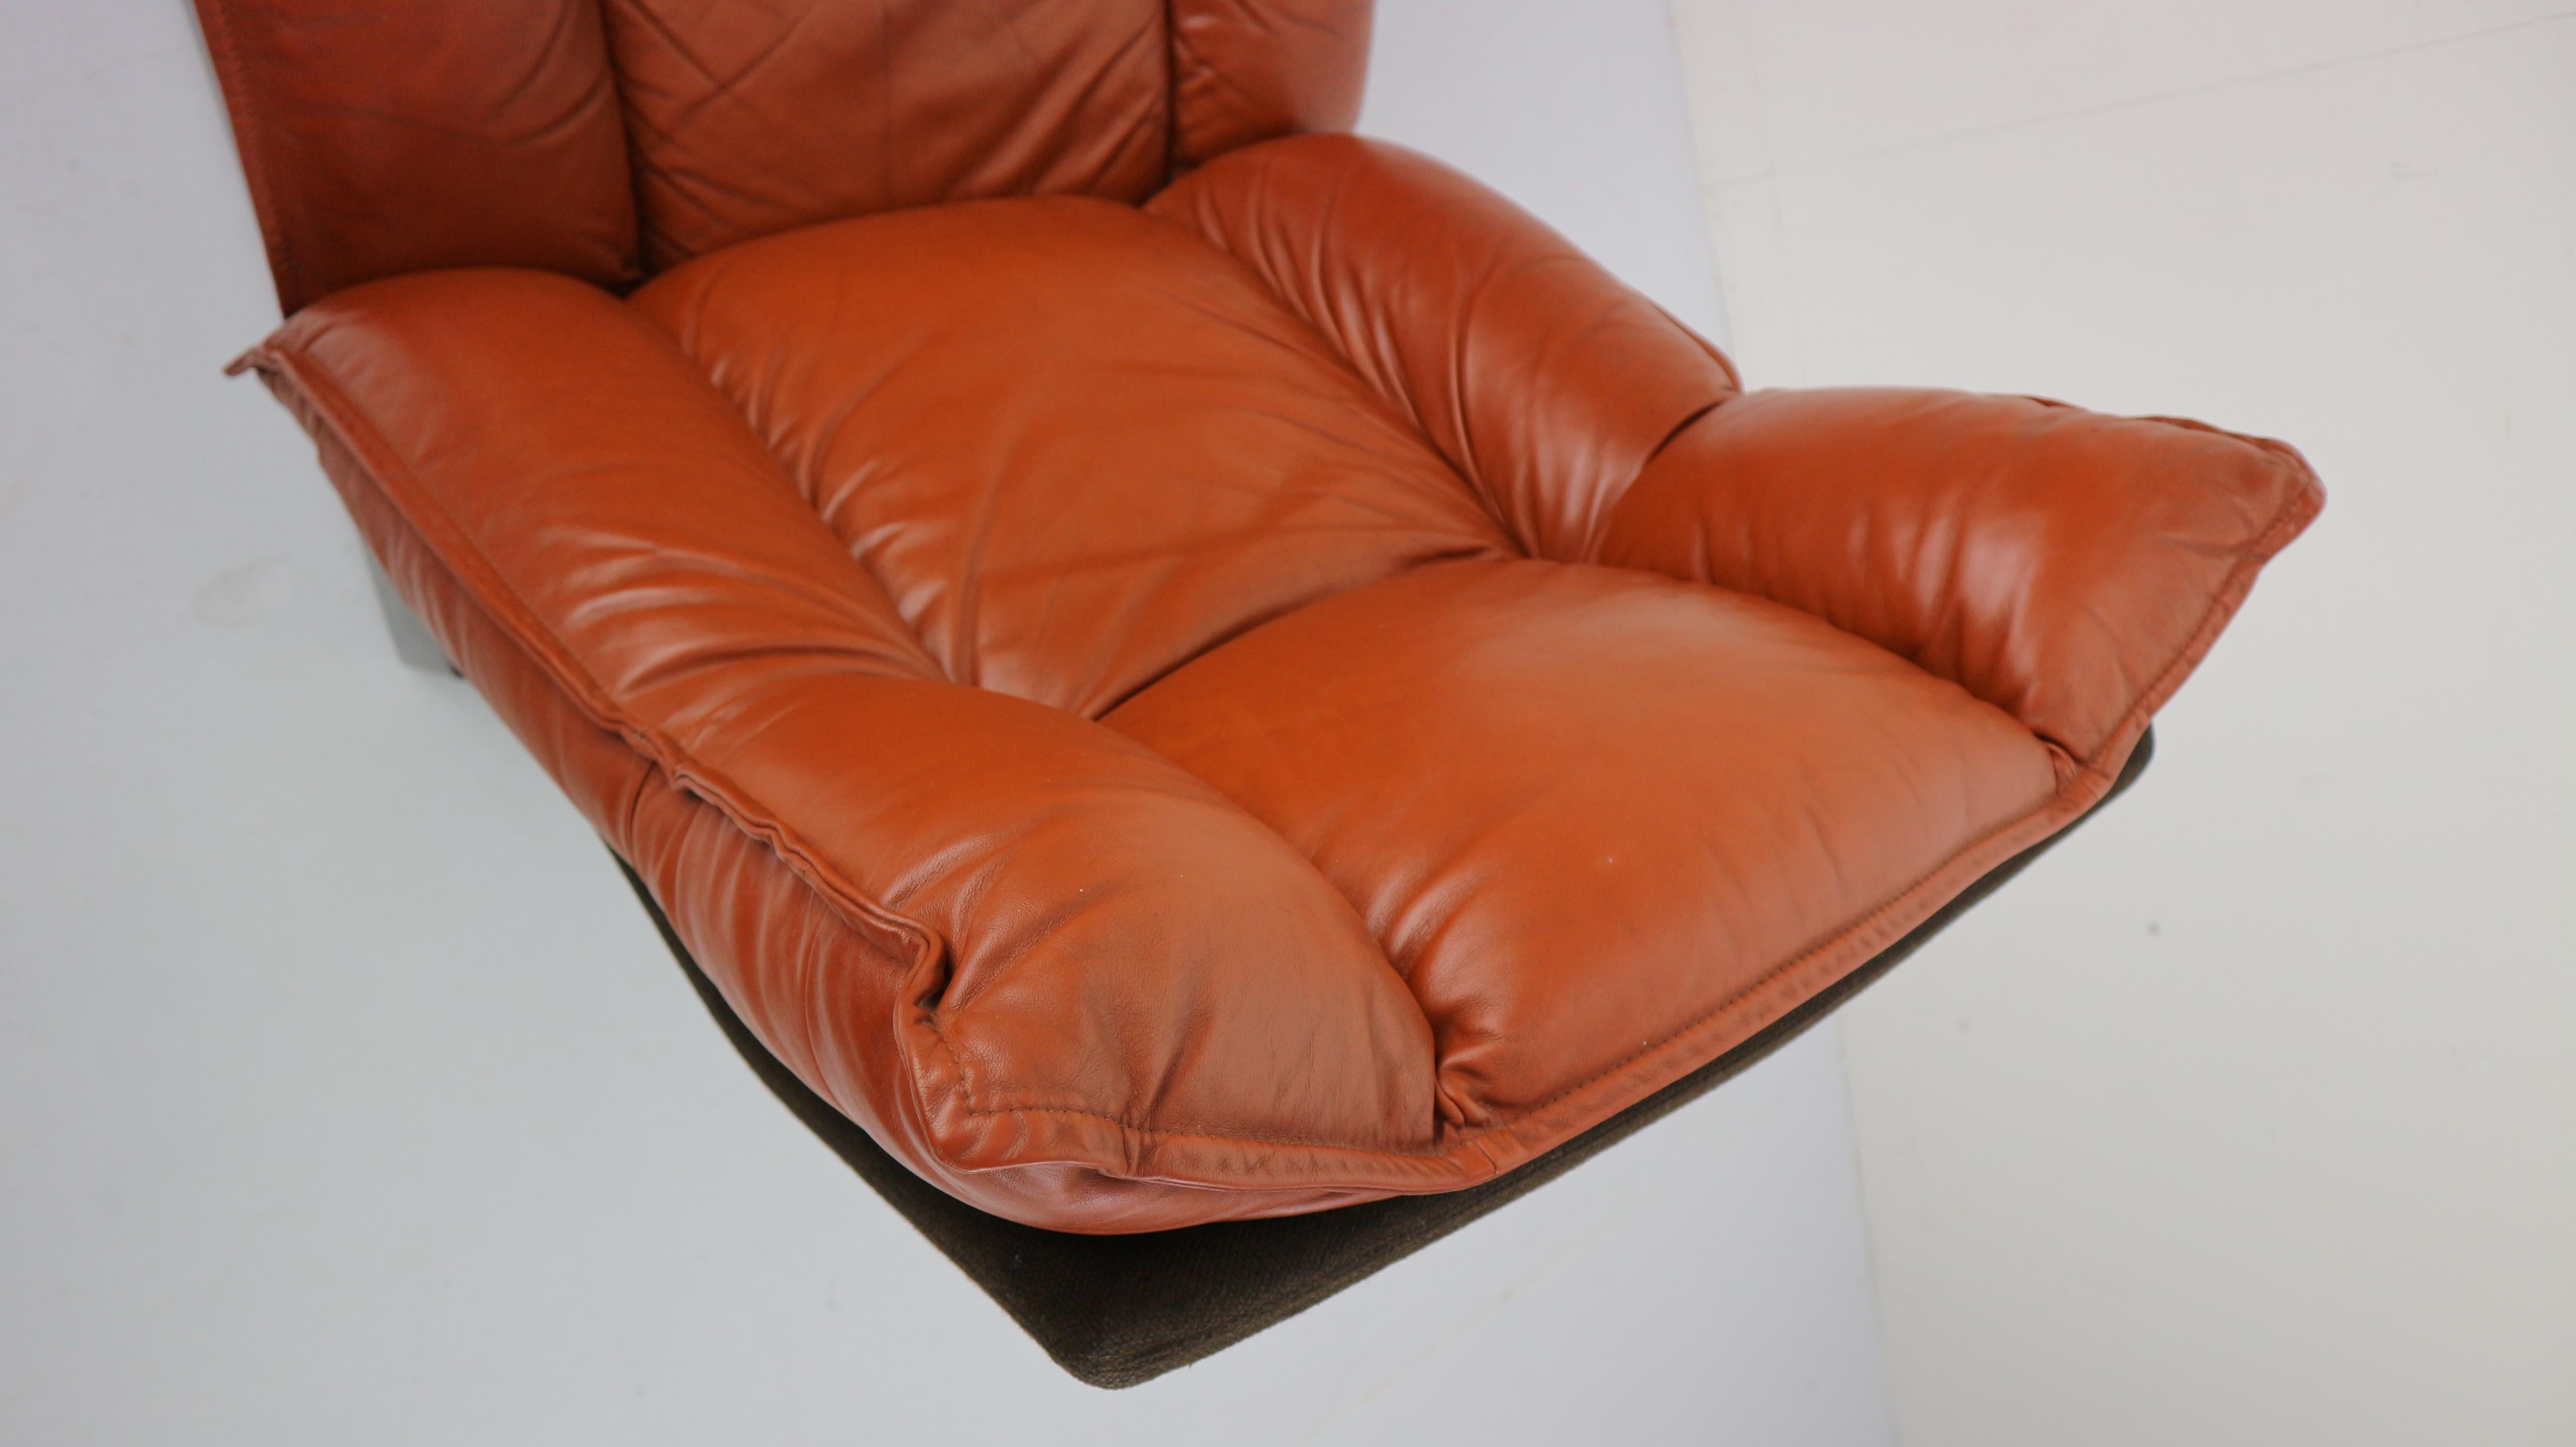 Cognac Leather and Wood Lounge Chair, Dutch Modern Design, 1970s 13